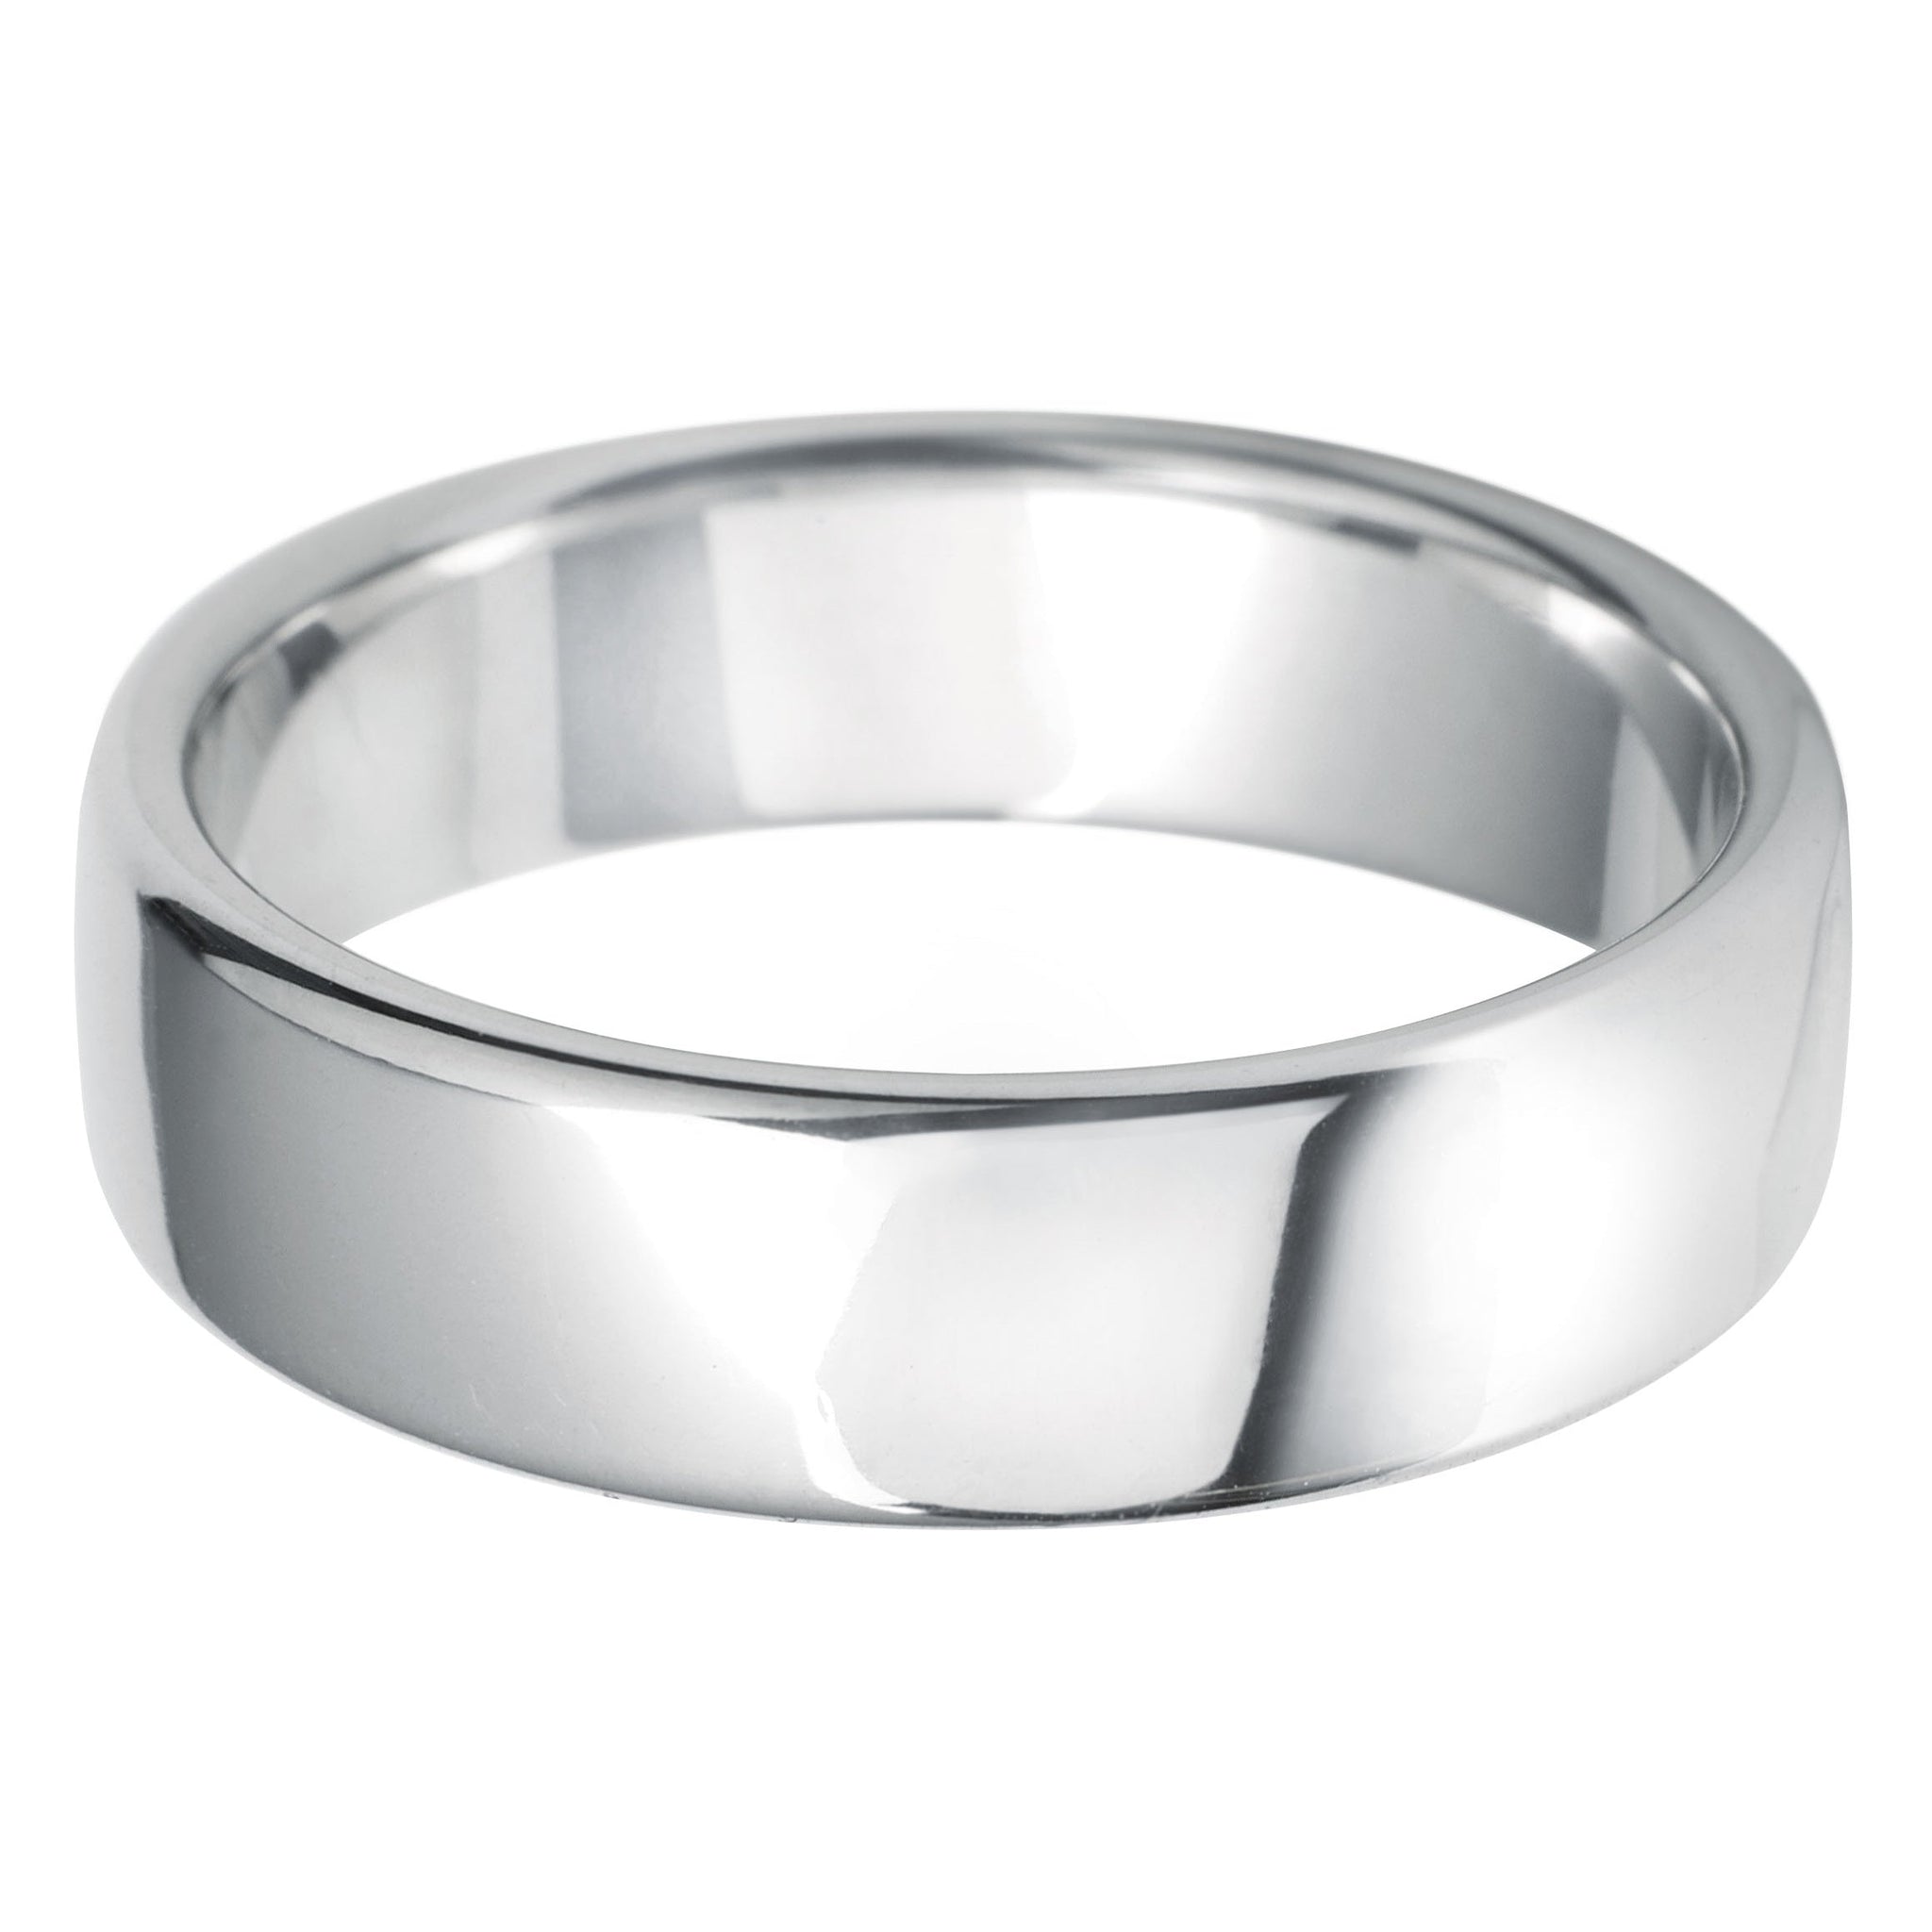 8mm Rounded Flat Heavy Weight Wedding Ring